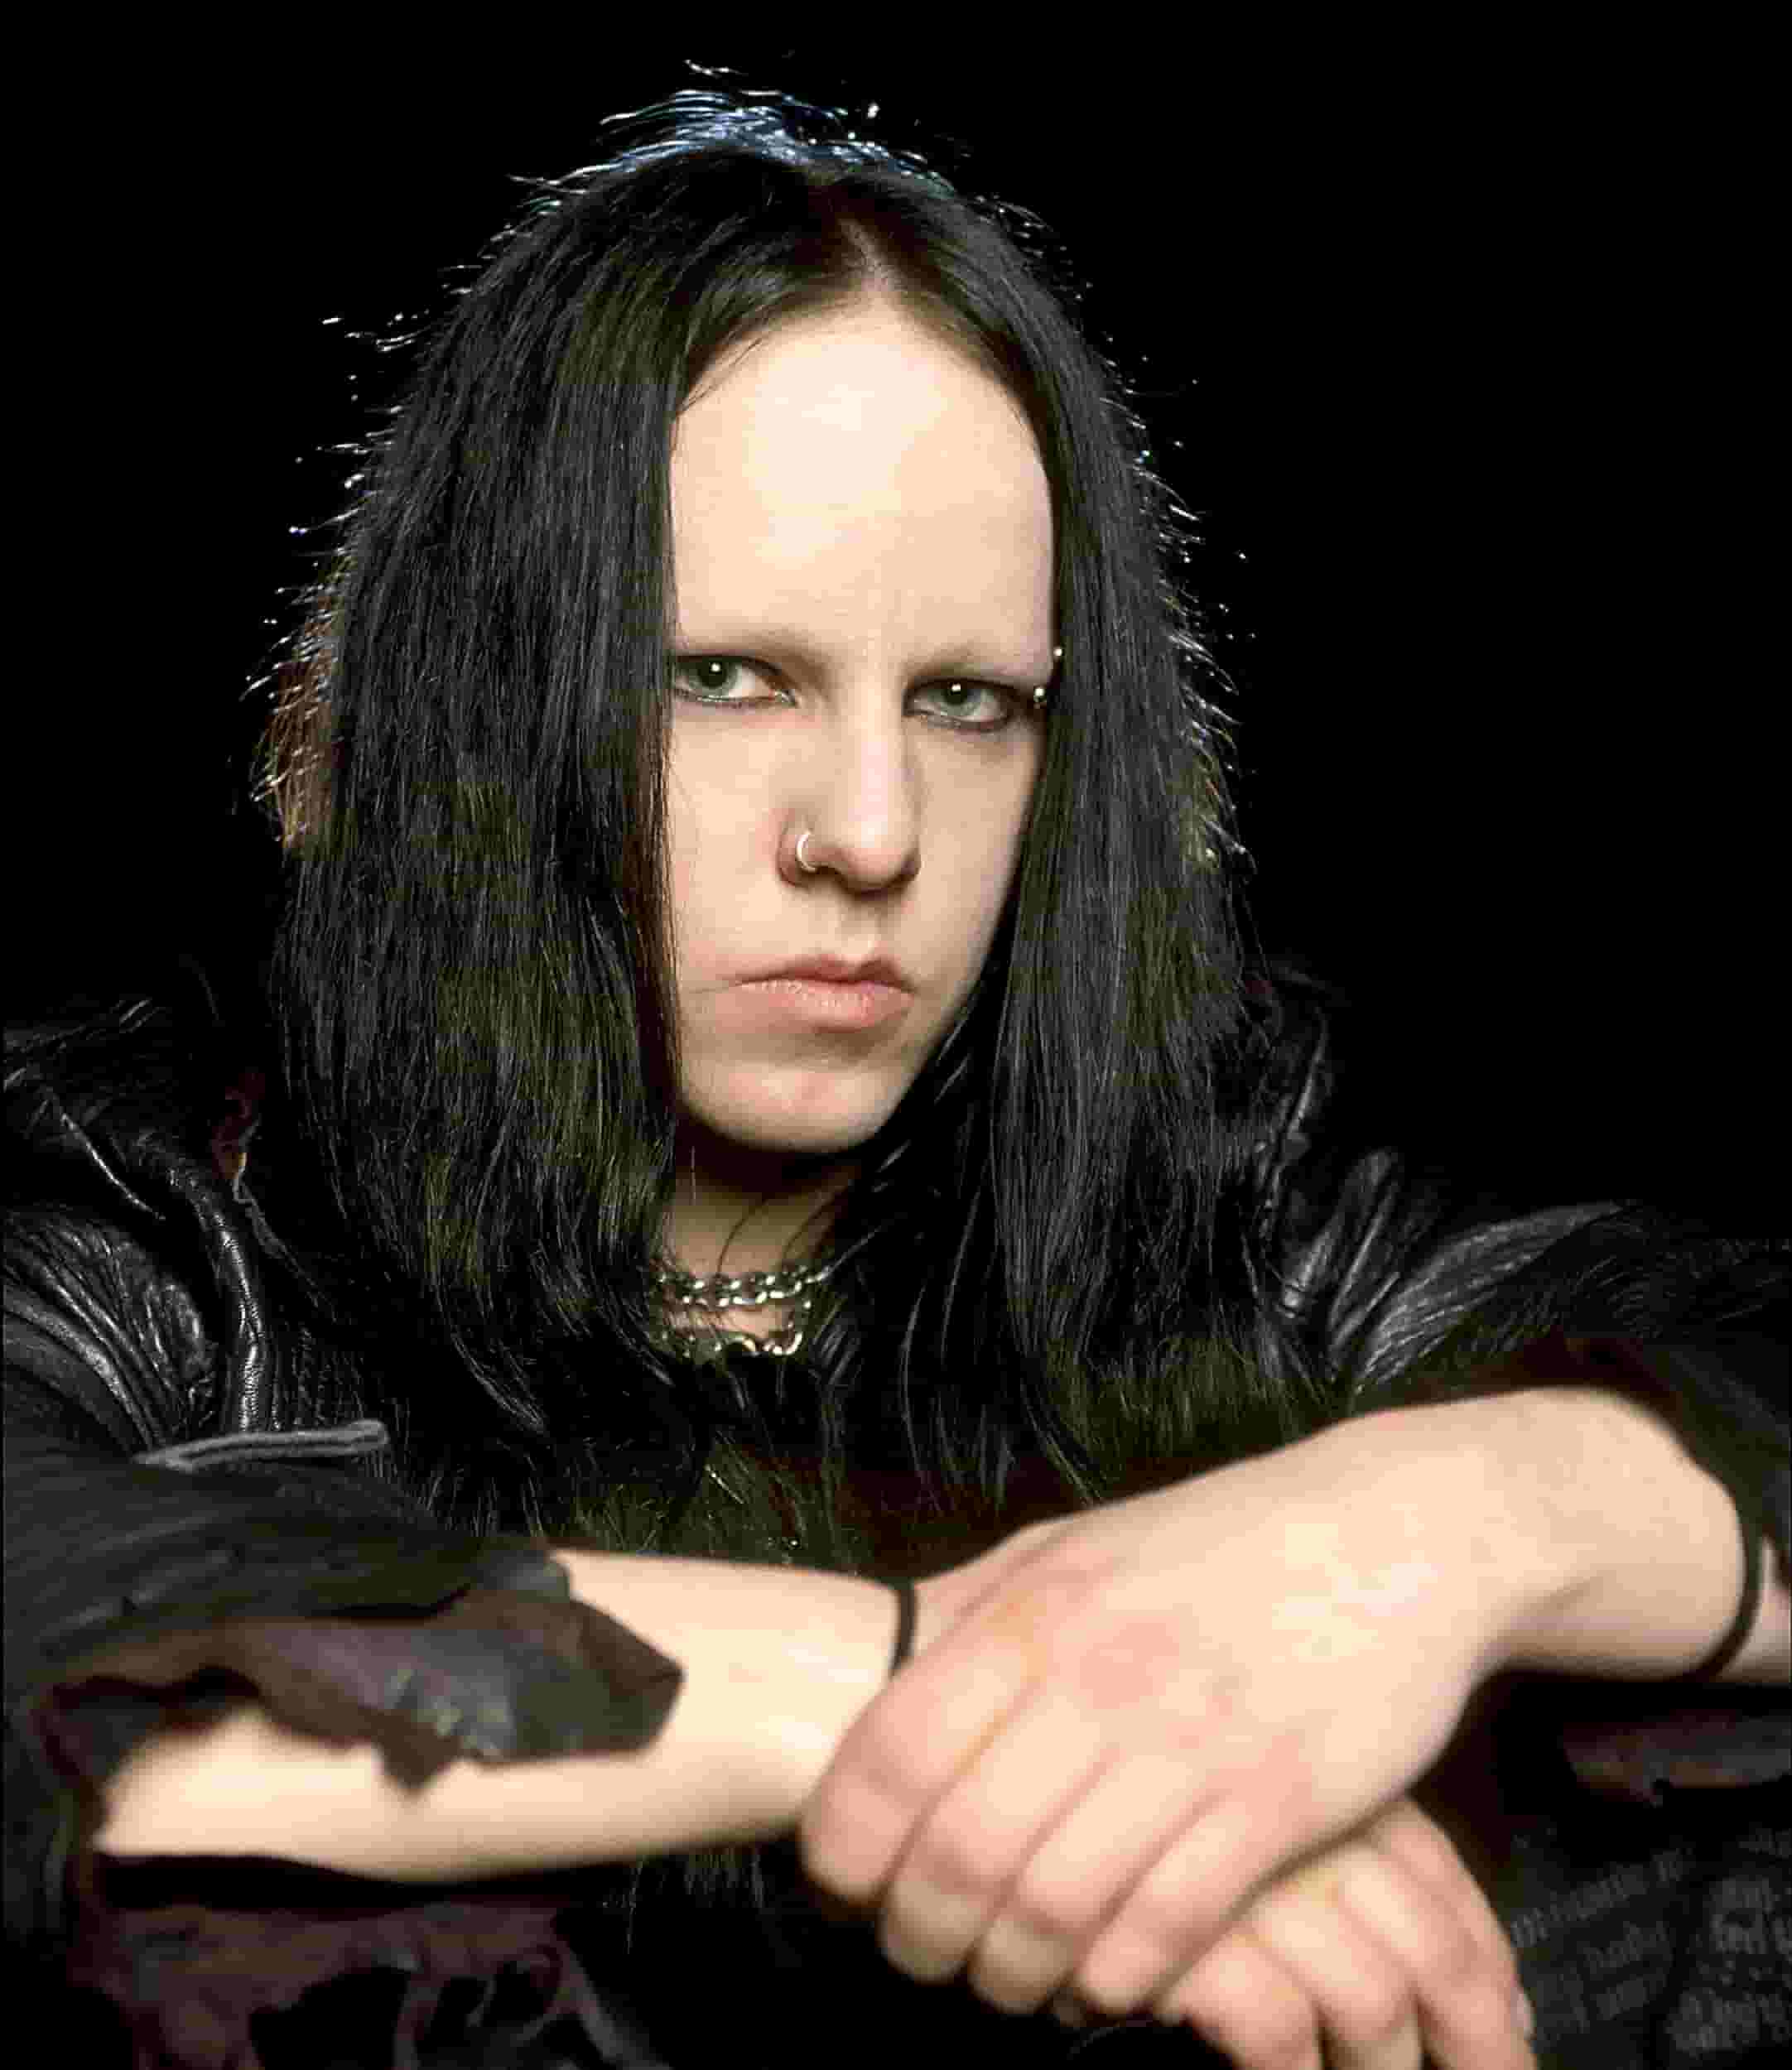 Image of Joey Jordison, the drummer of the famous band Slipknot